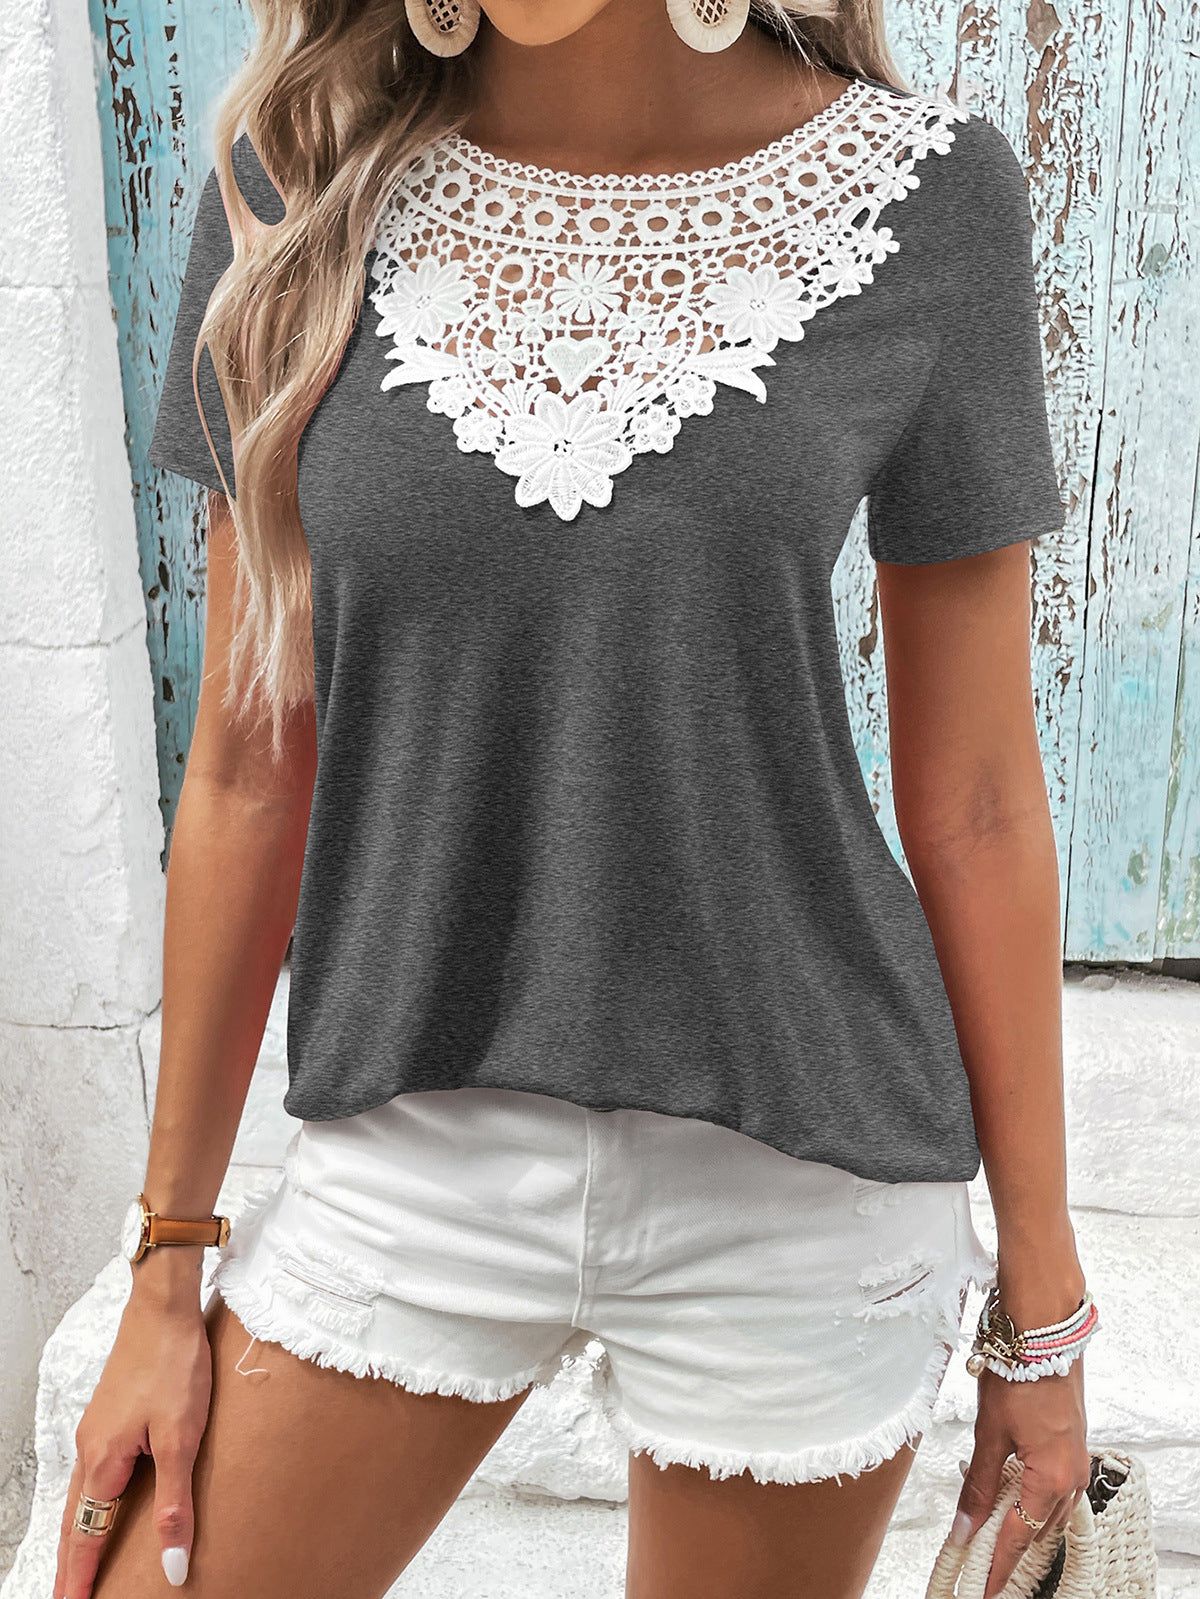 Spliced Lace Contrast Short Sleeve Top.